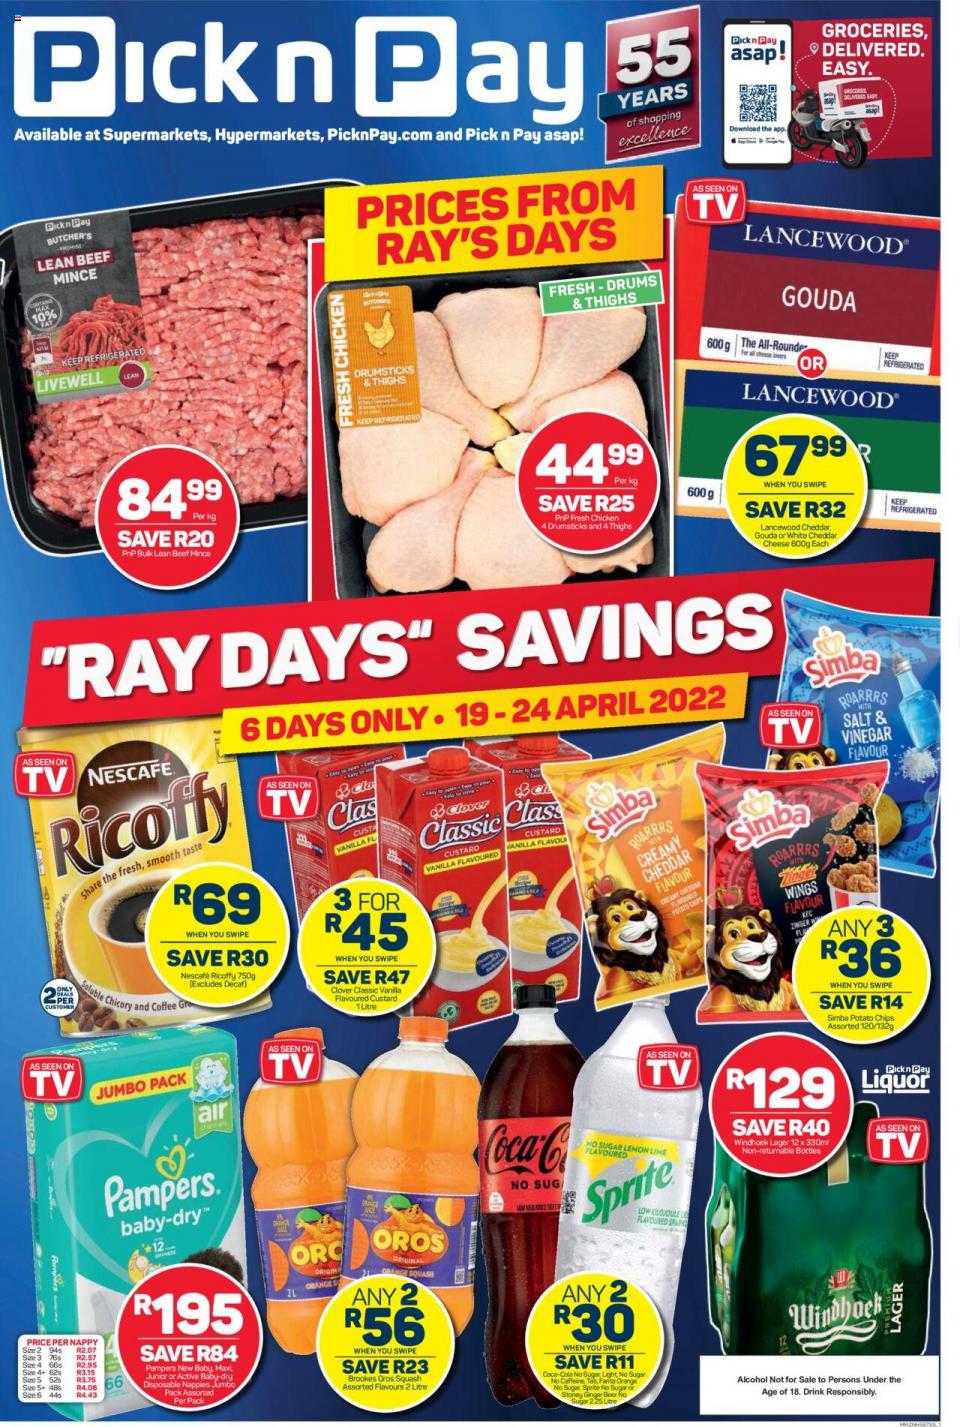 Pick n Pay Specials Ray Days Savings 19 – 24 April 2022